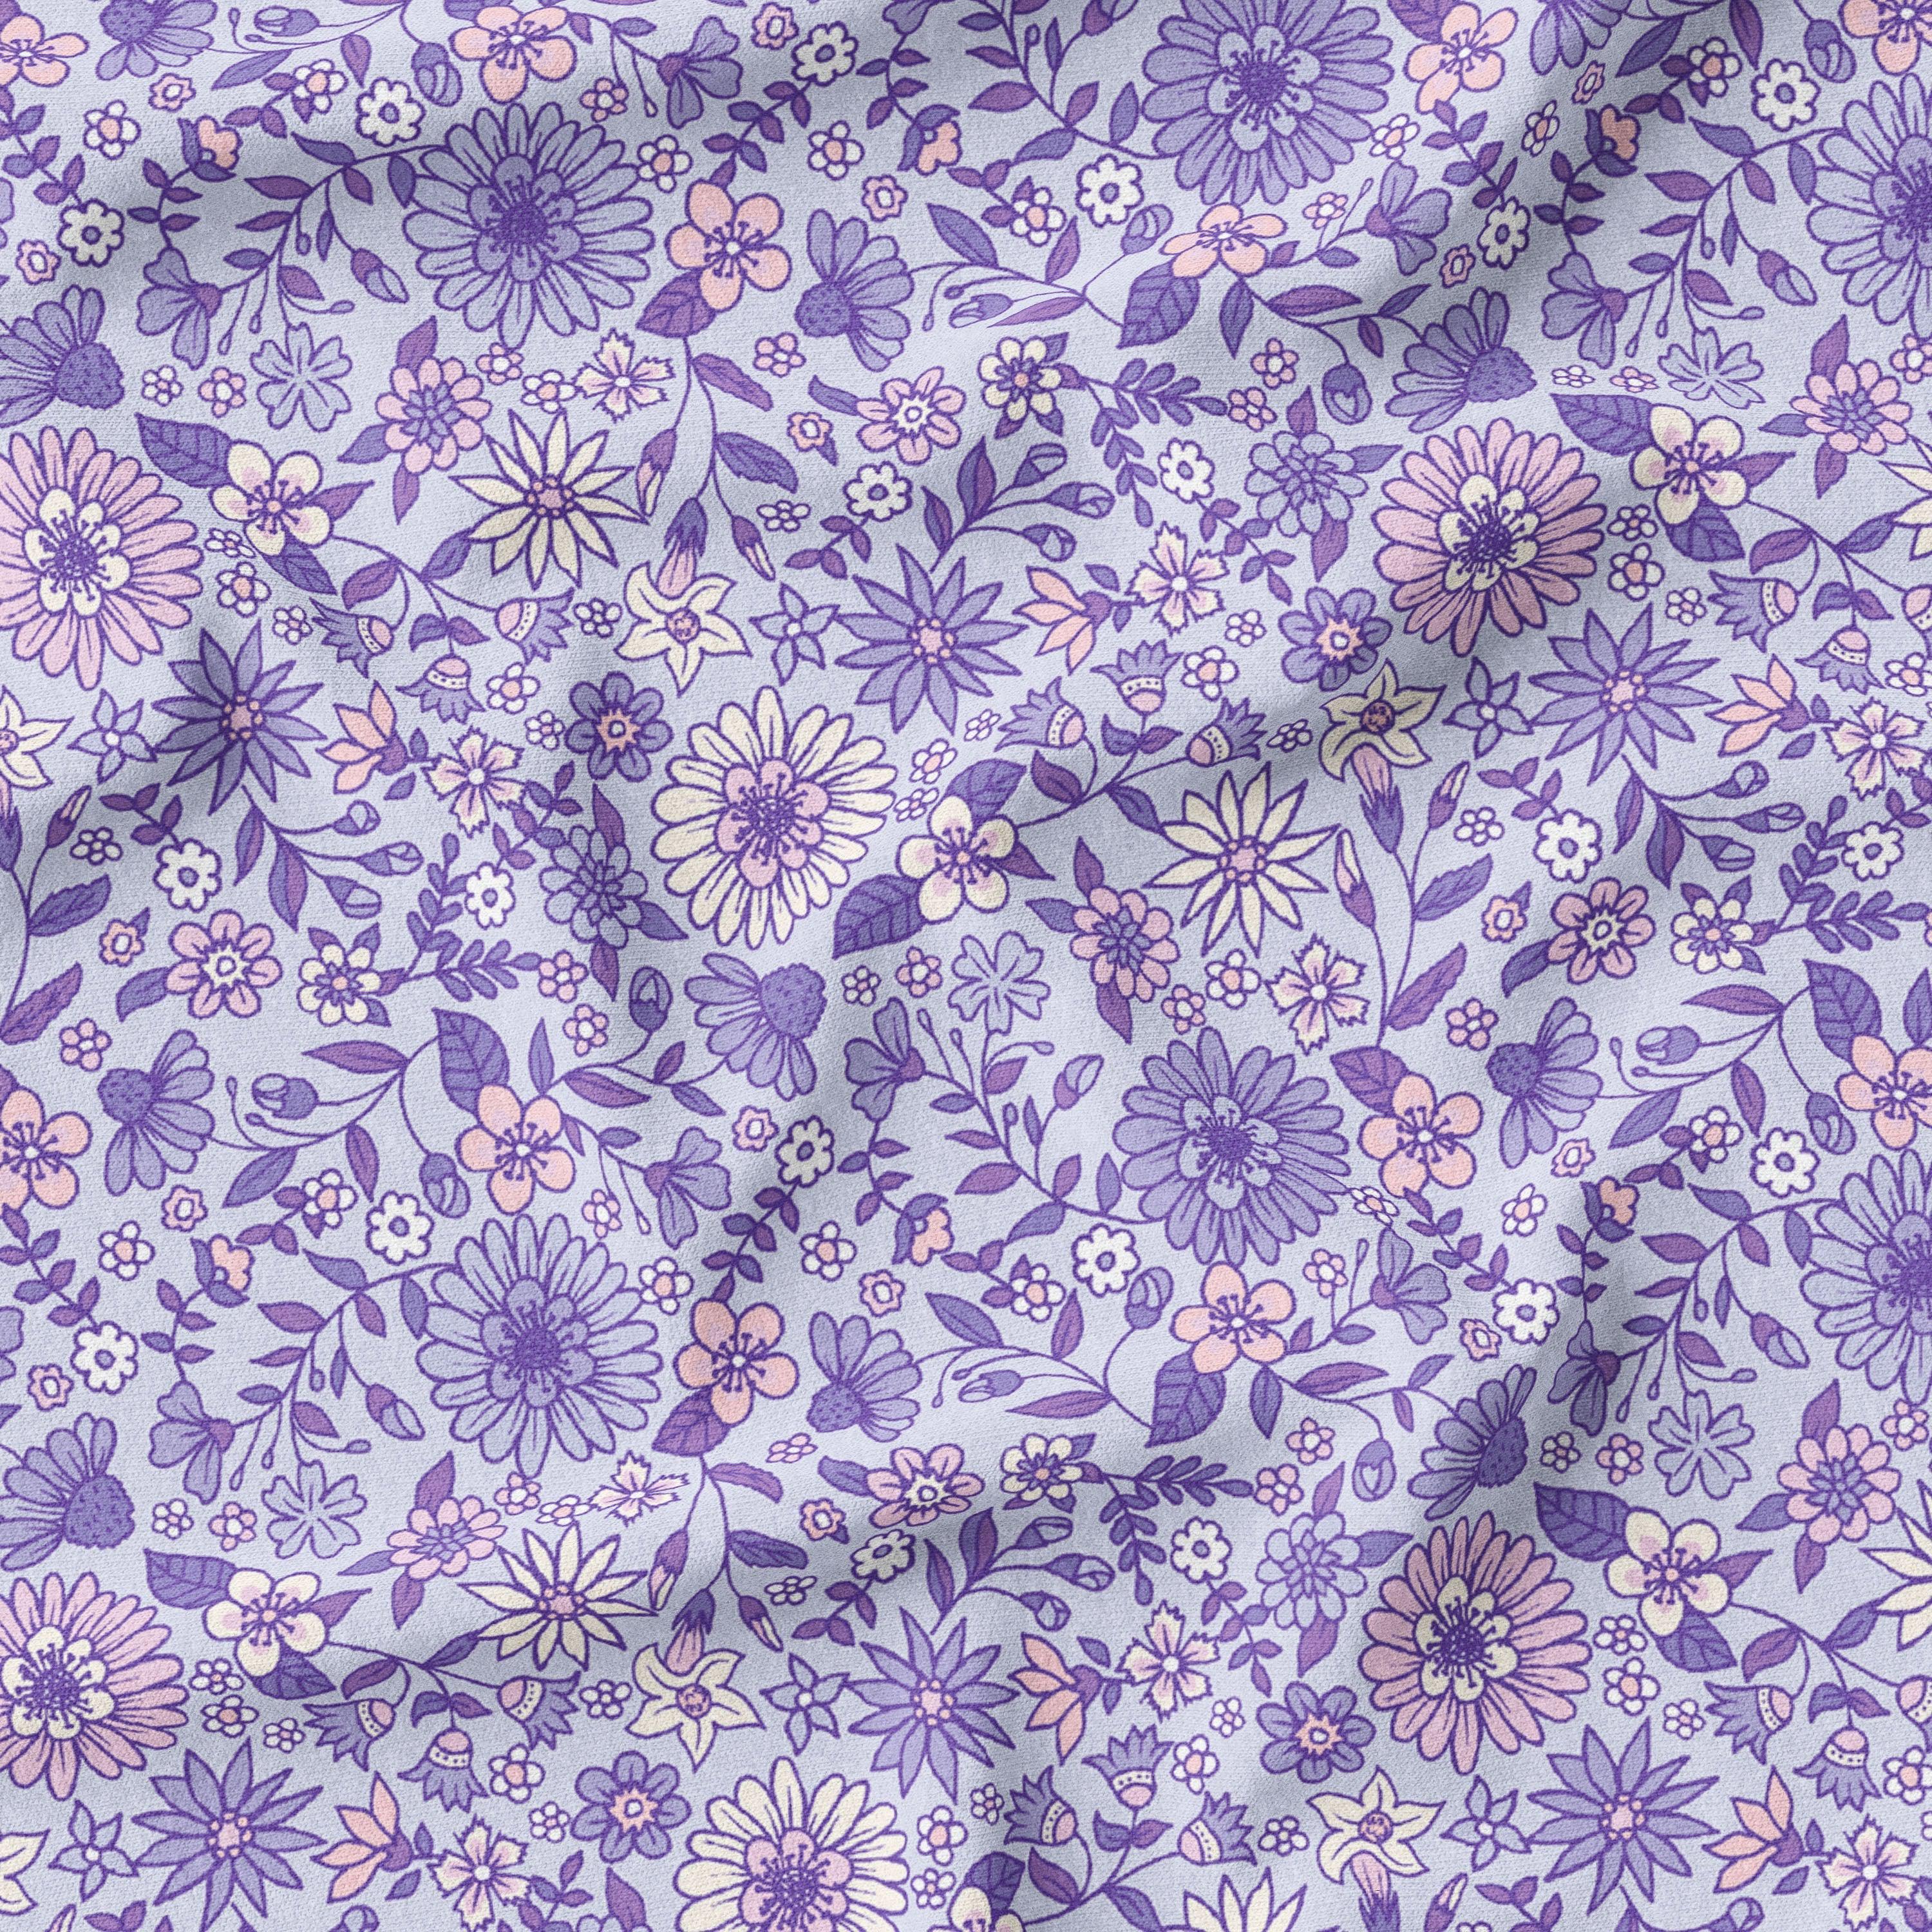 Whispering Wildflower - Boho Floral Fabric